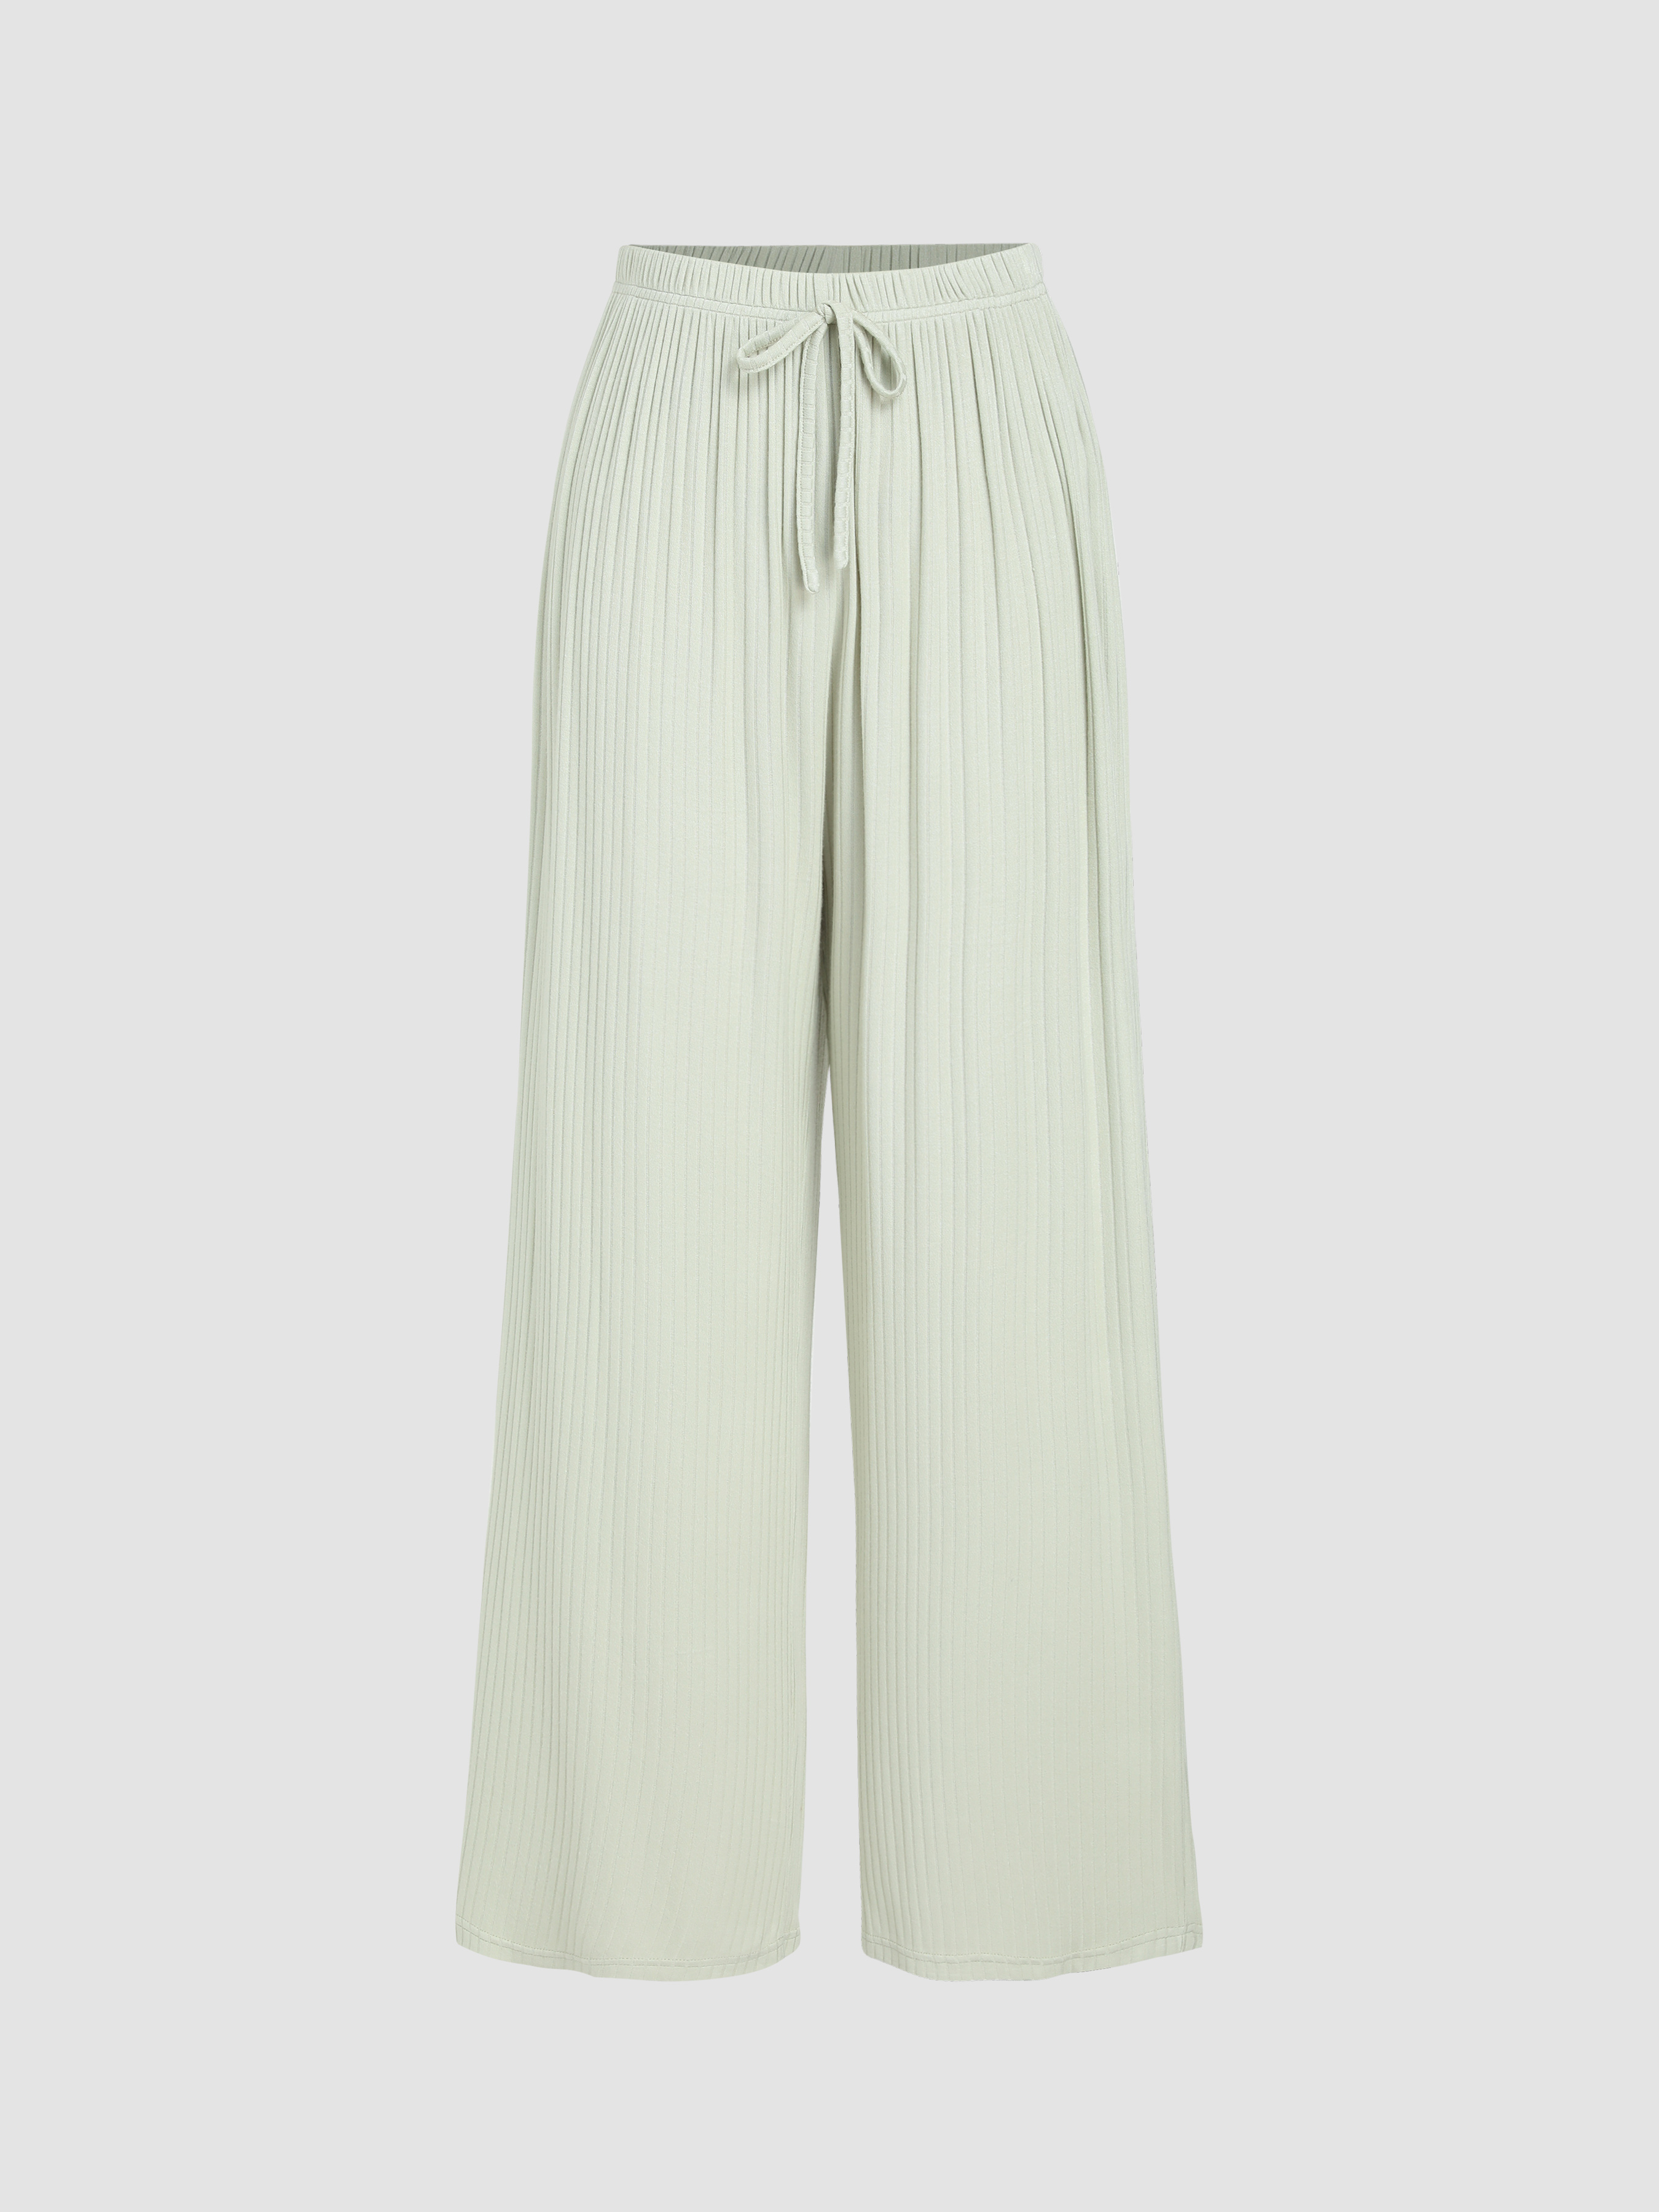 SHEIN EZwear Solid Knotted Wide Leg Pants | SHEIN